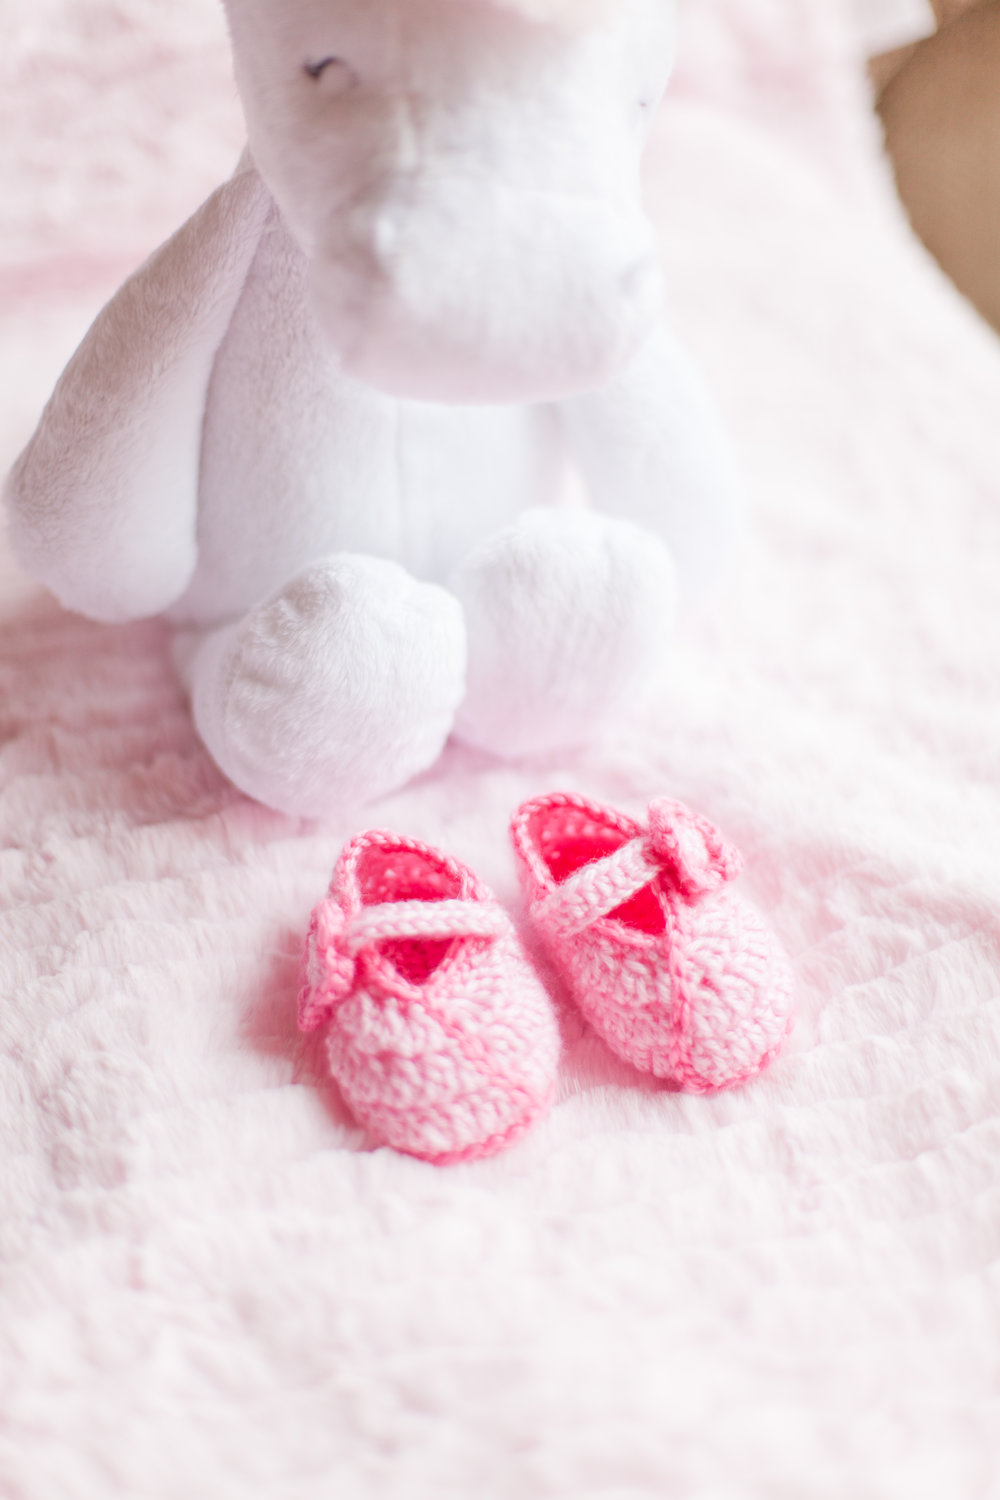  newborn, baby, girl, pink, bows, flowers, unicorn, baby shoes, new life 